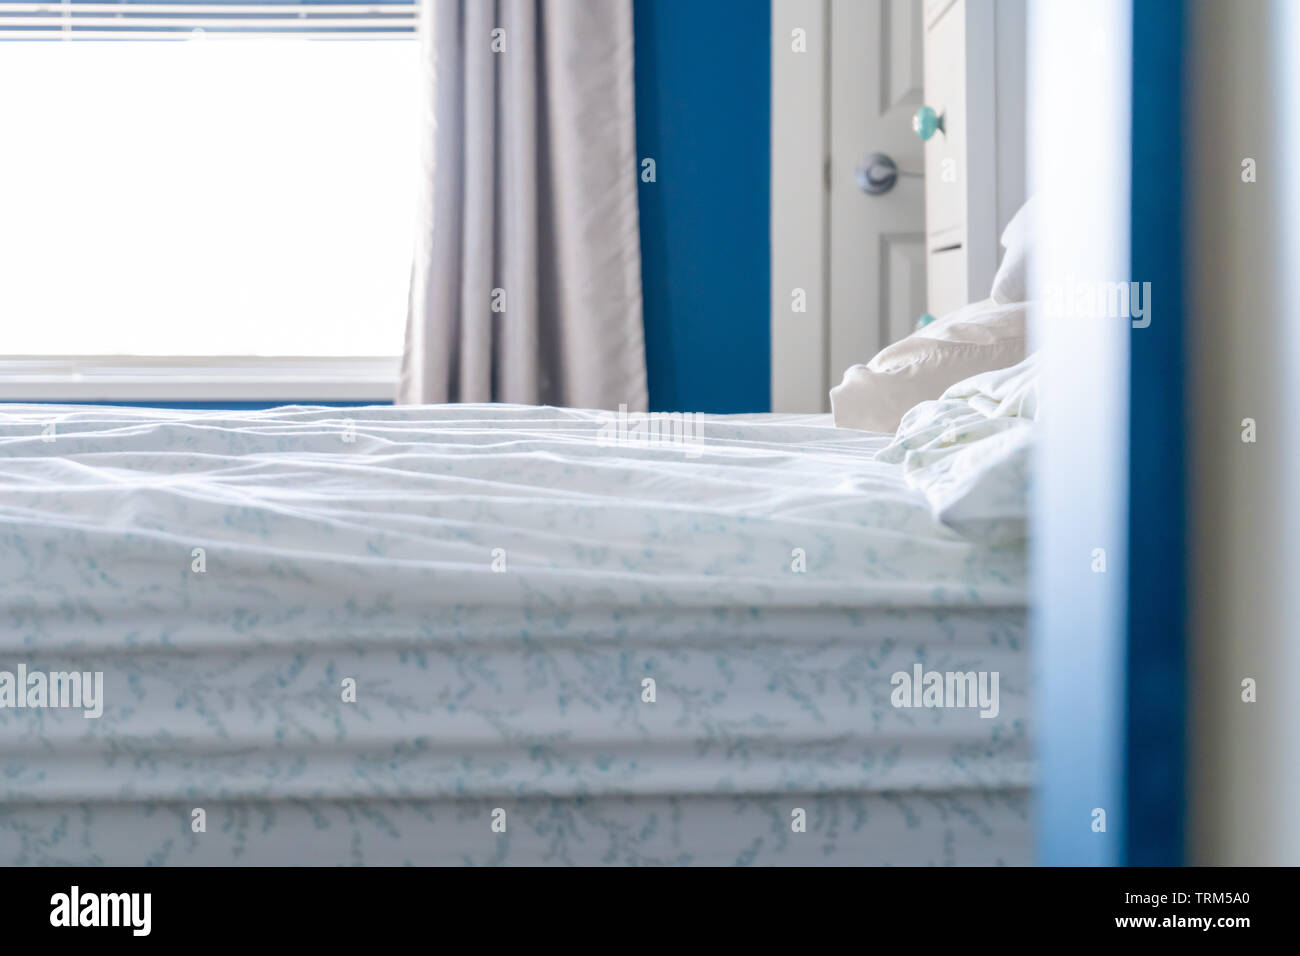 Low angle view of a slept-in bed with a messy sheet, no blankets, in a blue and white bedroom home design. Stock Photo